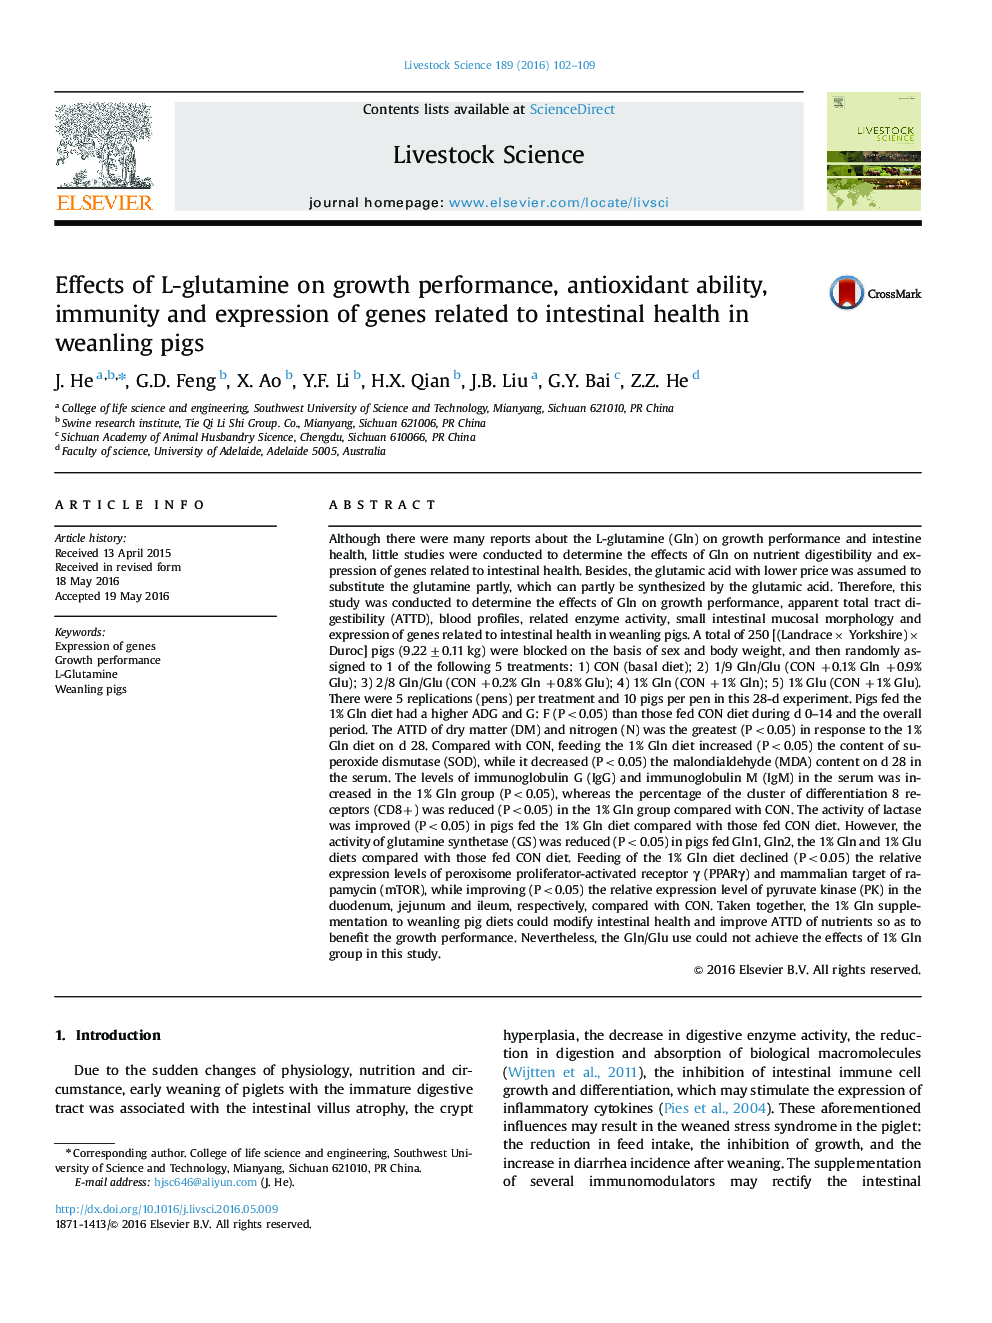 Effects of L-glutamine on growth performance, antioxidant ability, immunity and expression of genes related to intestinal health in weanling pigs